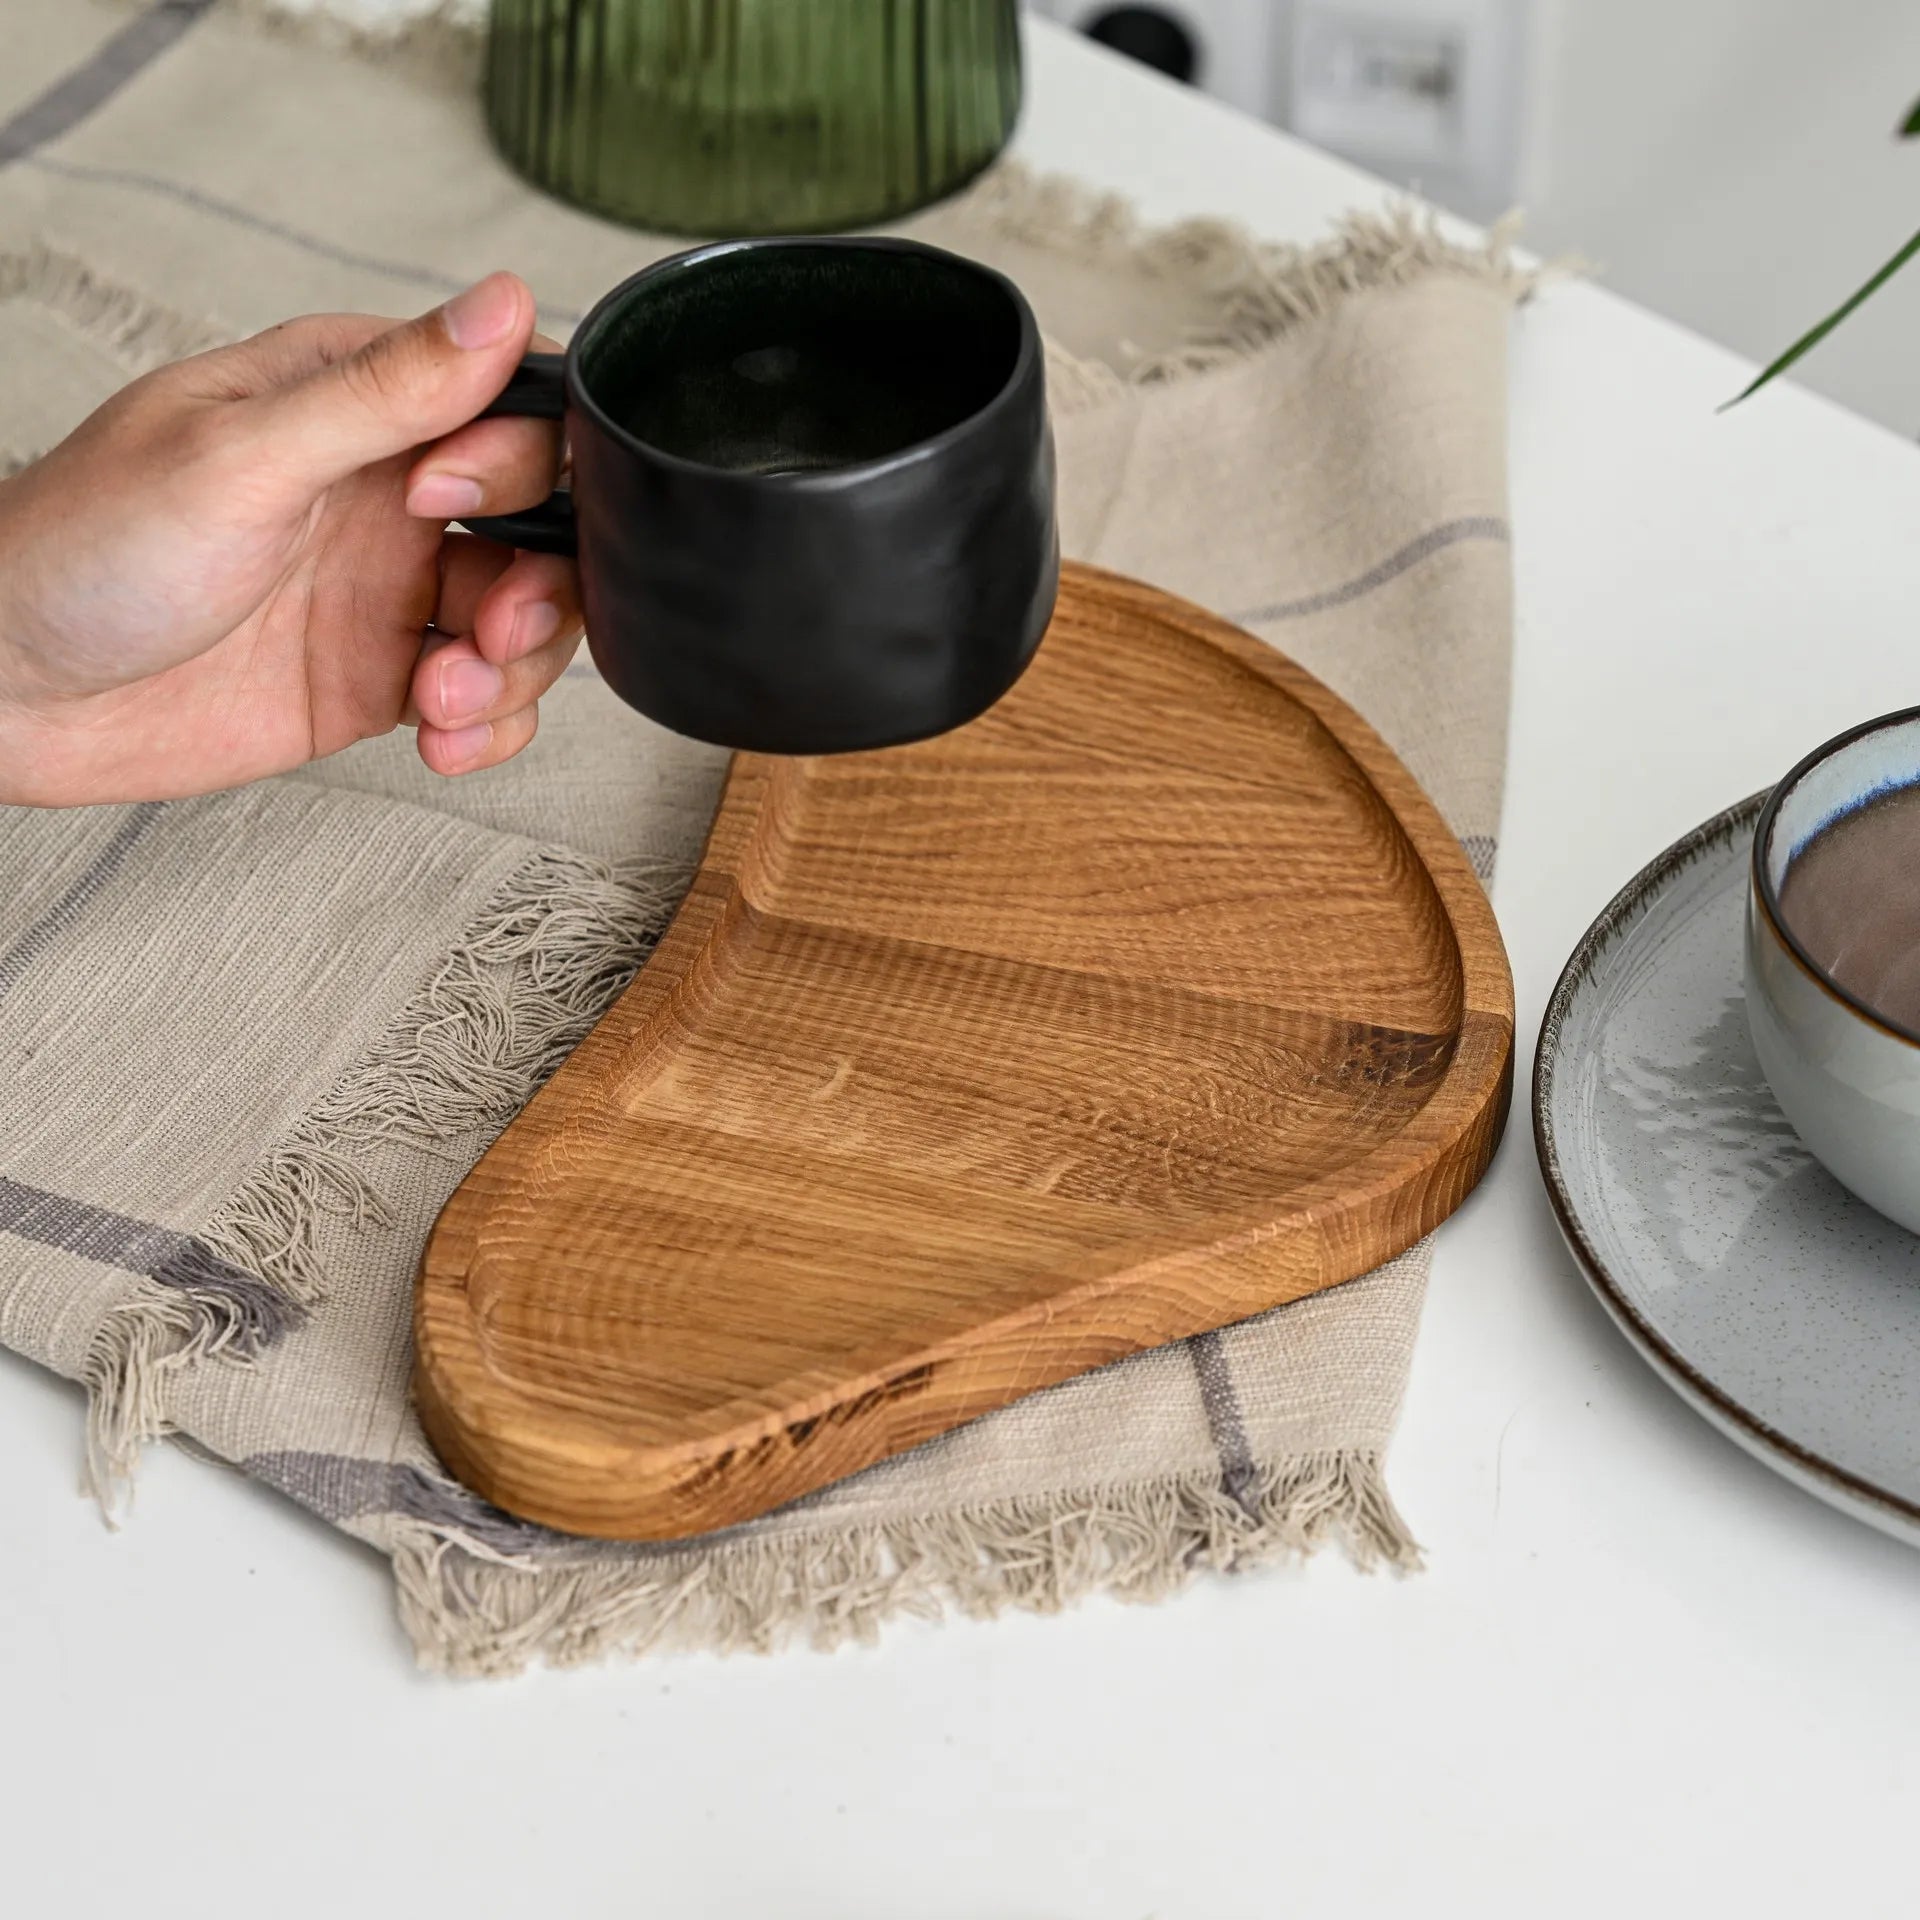 Rustic wooden tray, designed for hotel service, adding a charming and elegant presentation to room service meals and beverages.